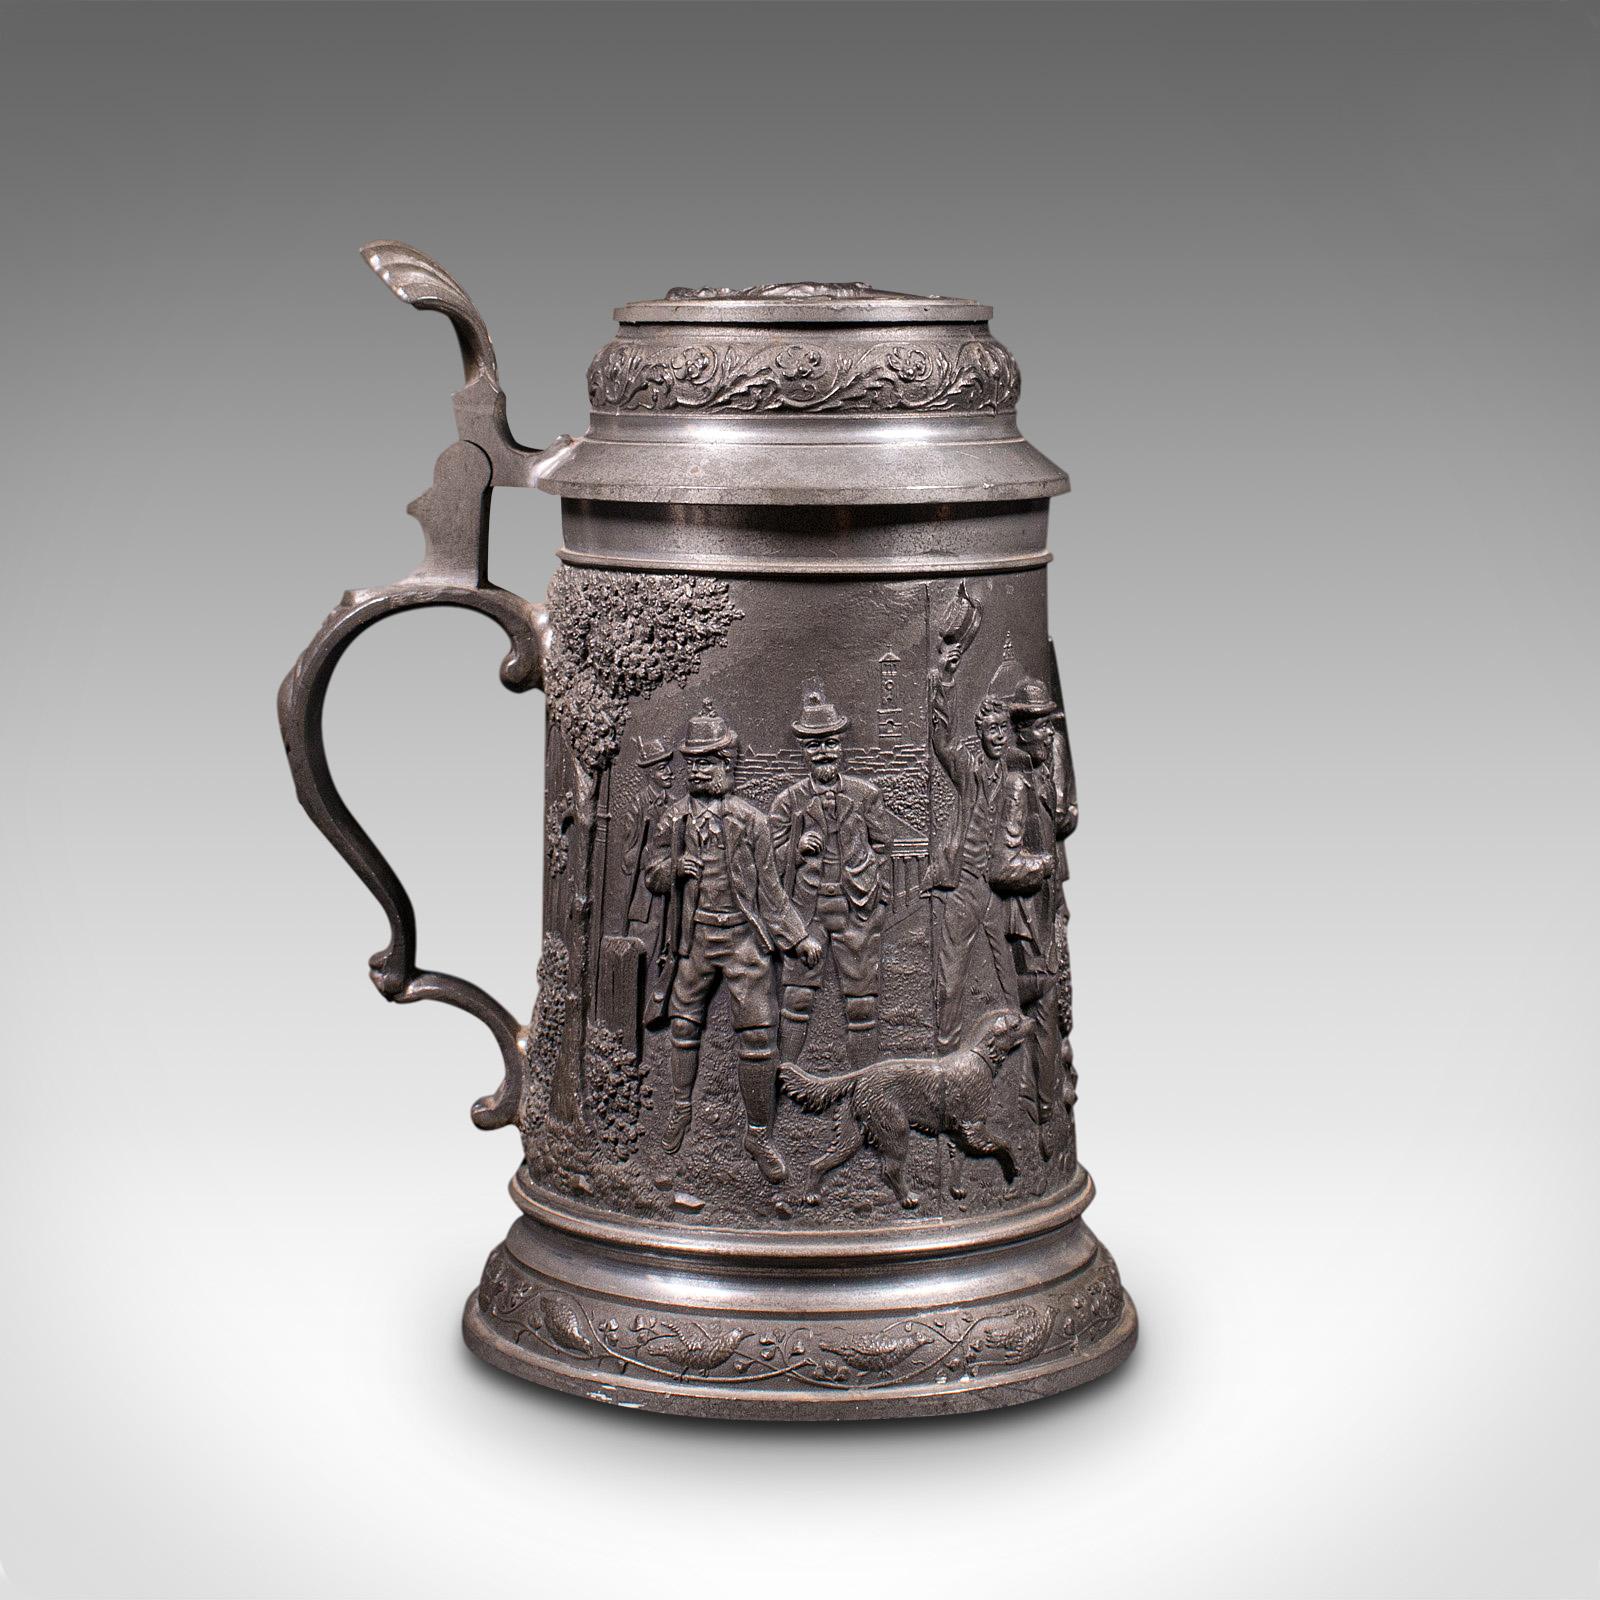 This is an antique Bavarian beer stein. A German, pewter jug with decorative relief, dating to the early 20th century, circa 1920.

Superb craftsmanship extolled by the striking relief detail
Displays a desirable aged patina
Pewter body in very